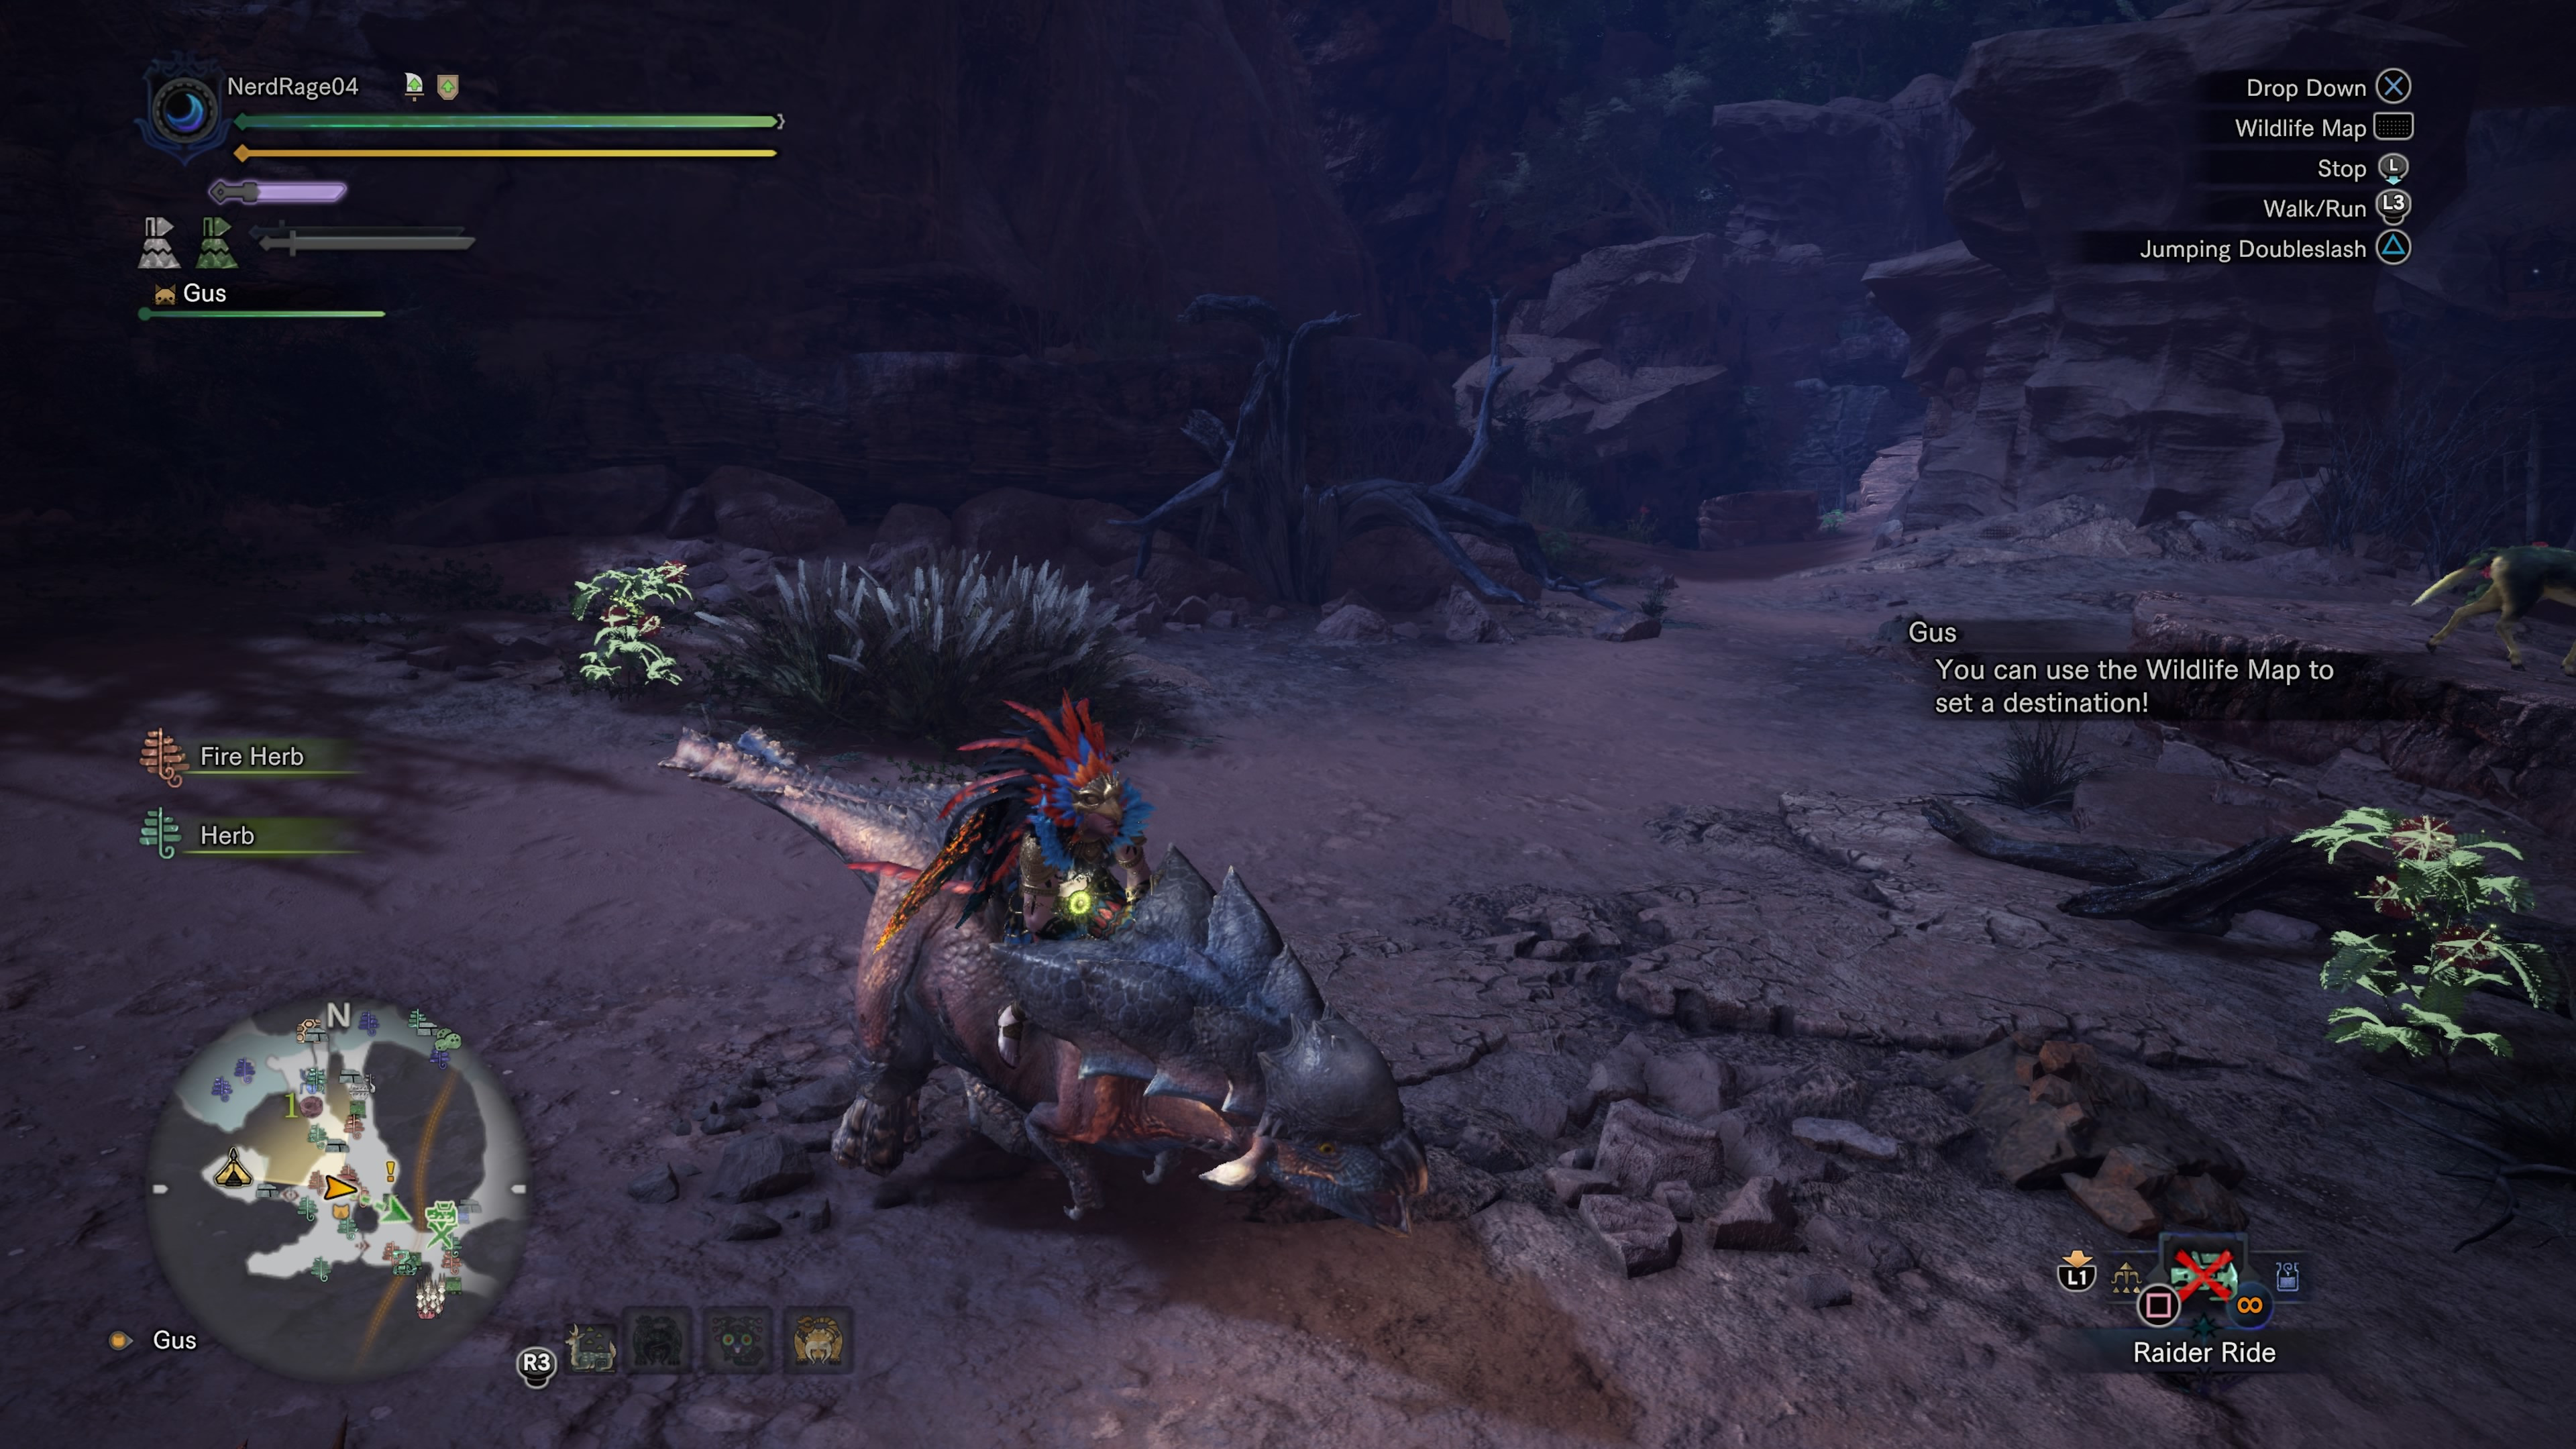 Monster Hunter on X: From out of the darkness comes the Pouncing